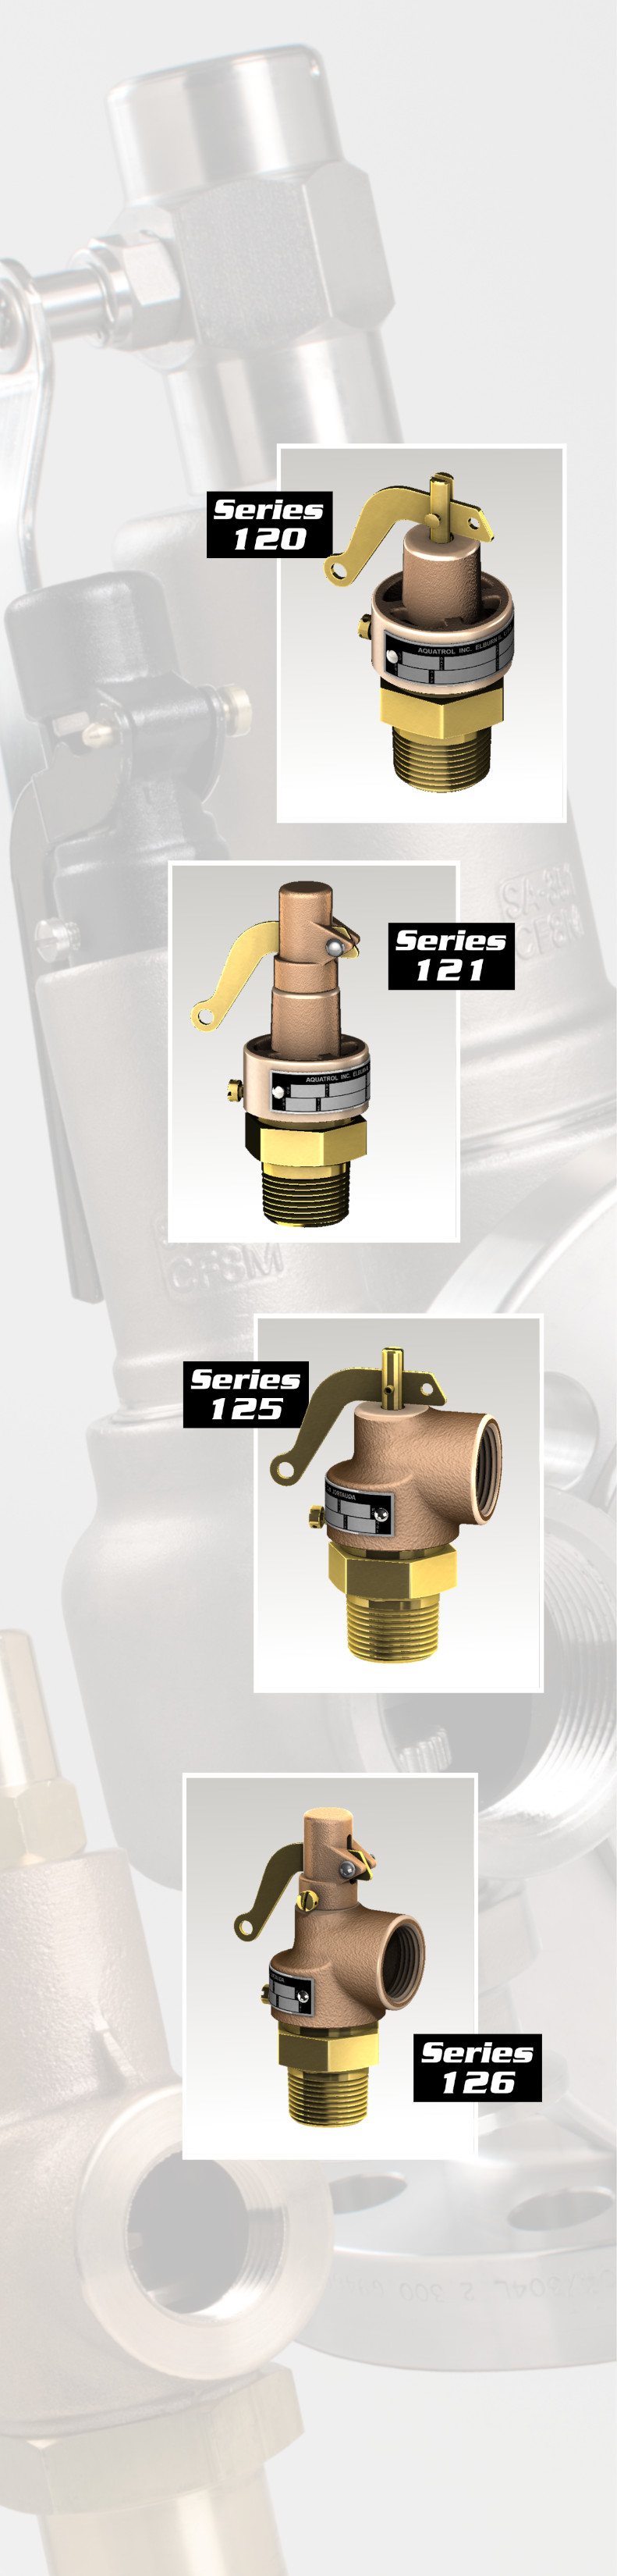 Series 120 brass safety valves with cap options